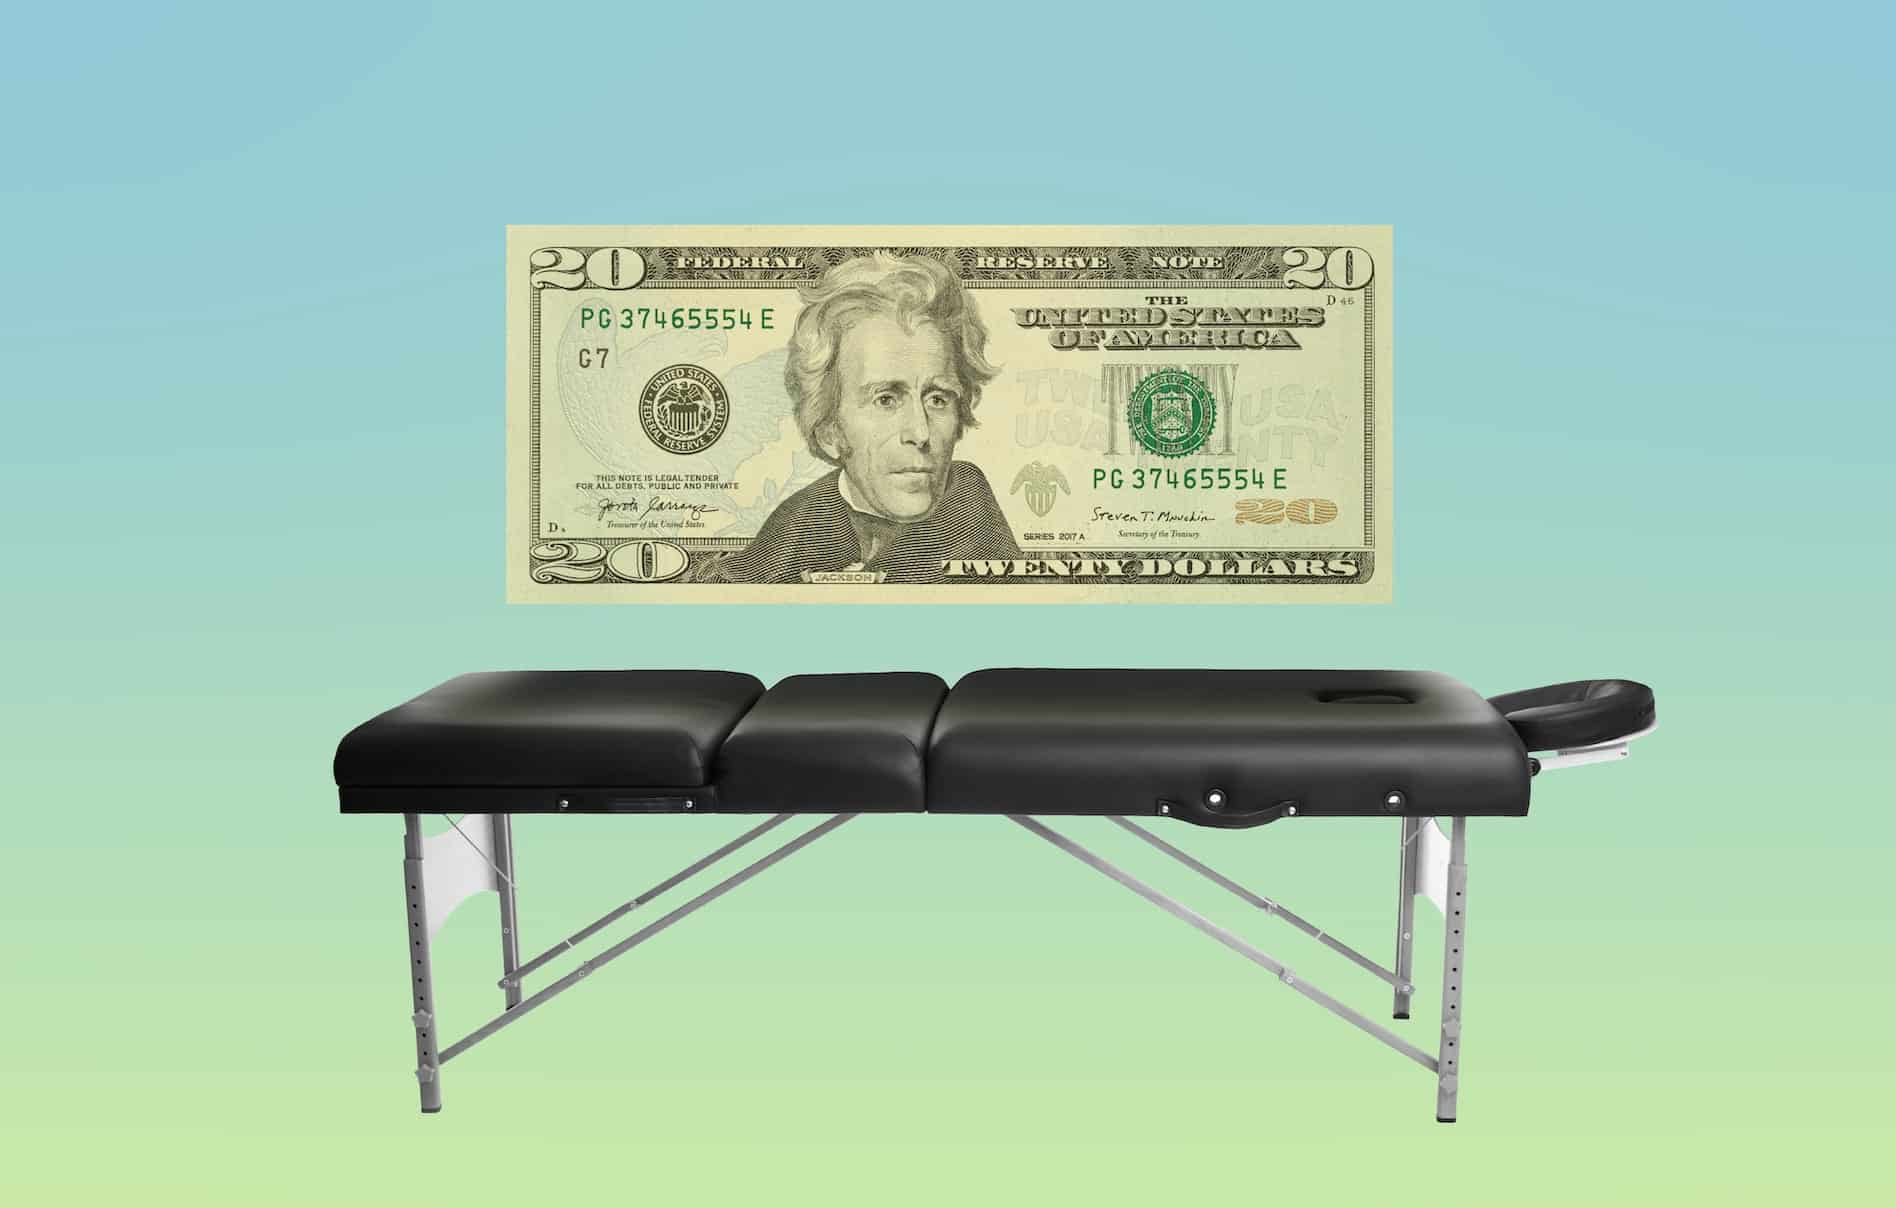 A massage table with a large $20 bill floating above